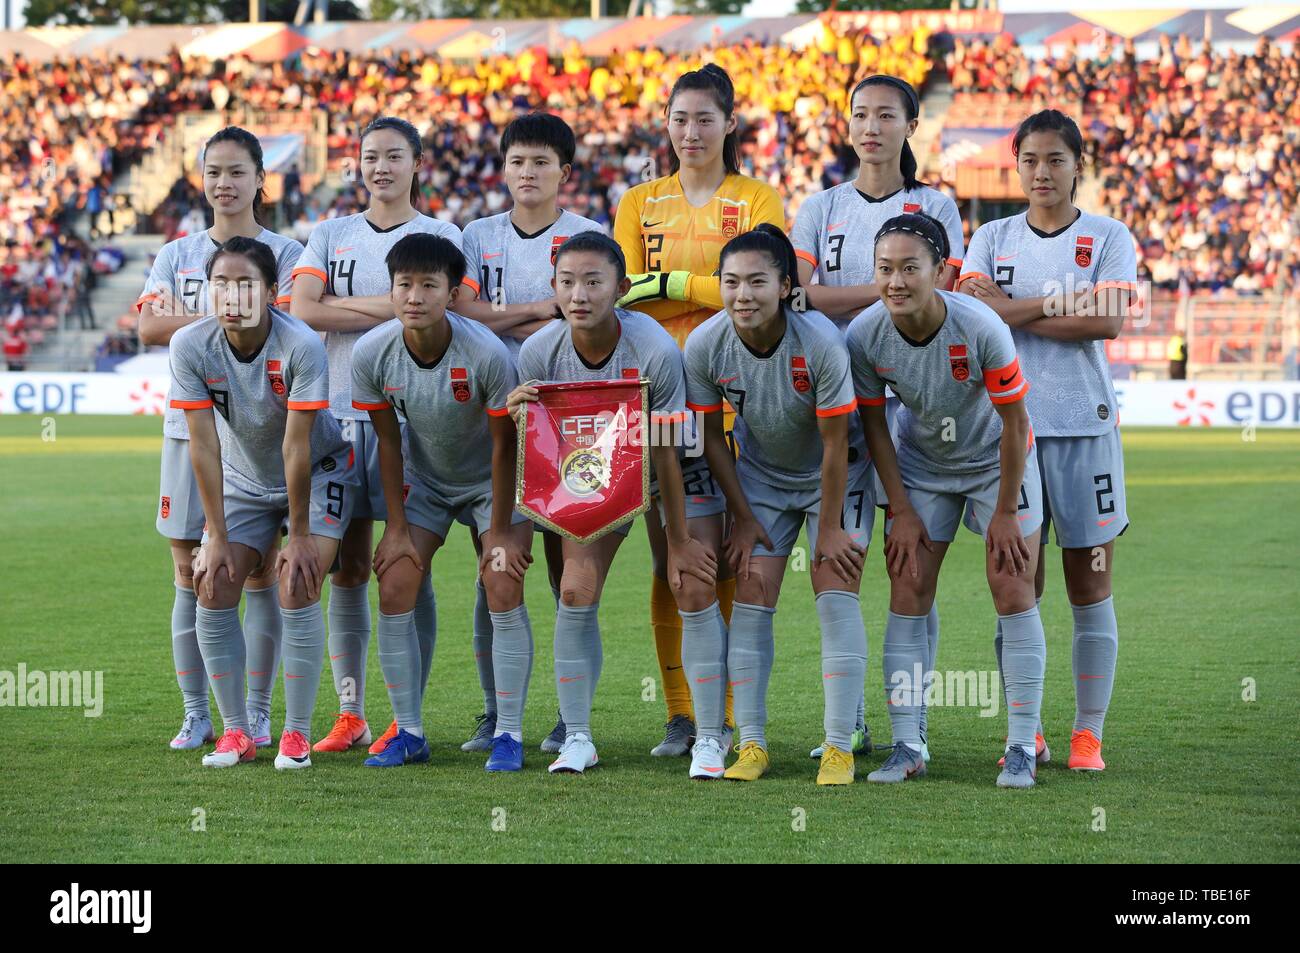 Creteil, France. 31st May, 2019. Players of China pose for a team photo before a friendly soccer match between France and China in Creteil, France, May 31, 2019. France won 2-1. Credit: Gao Jing/Xinhua/Alamy Live News Stock Photo